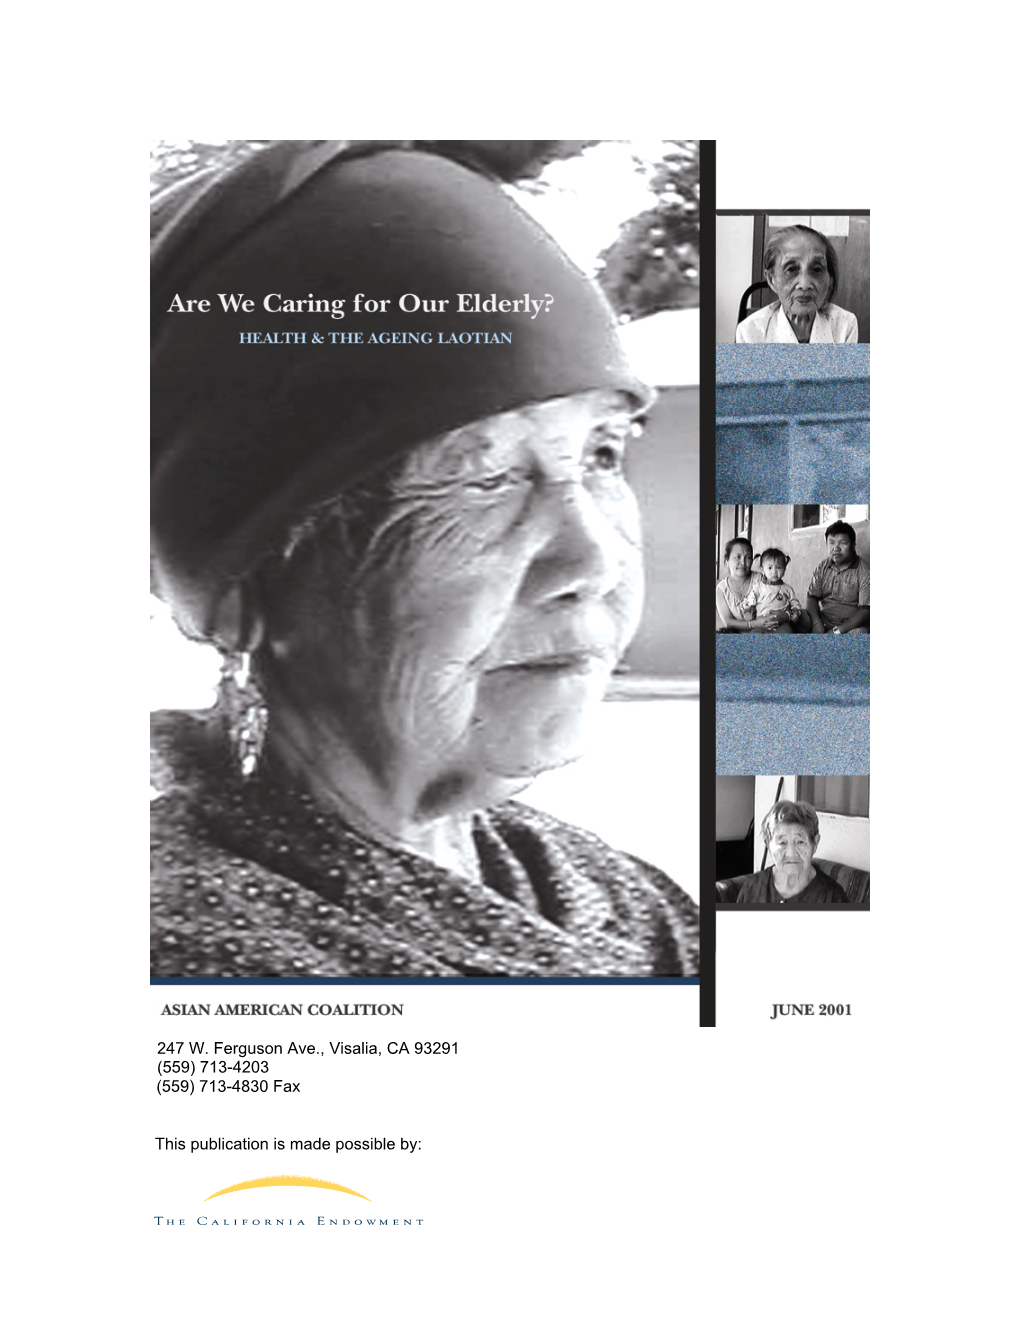 Are We Caring for Our Elderly? Health and the Aging Laotian